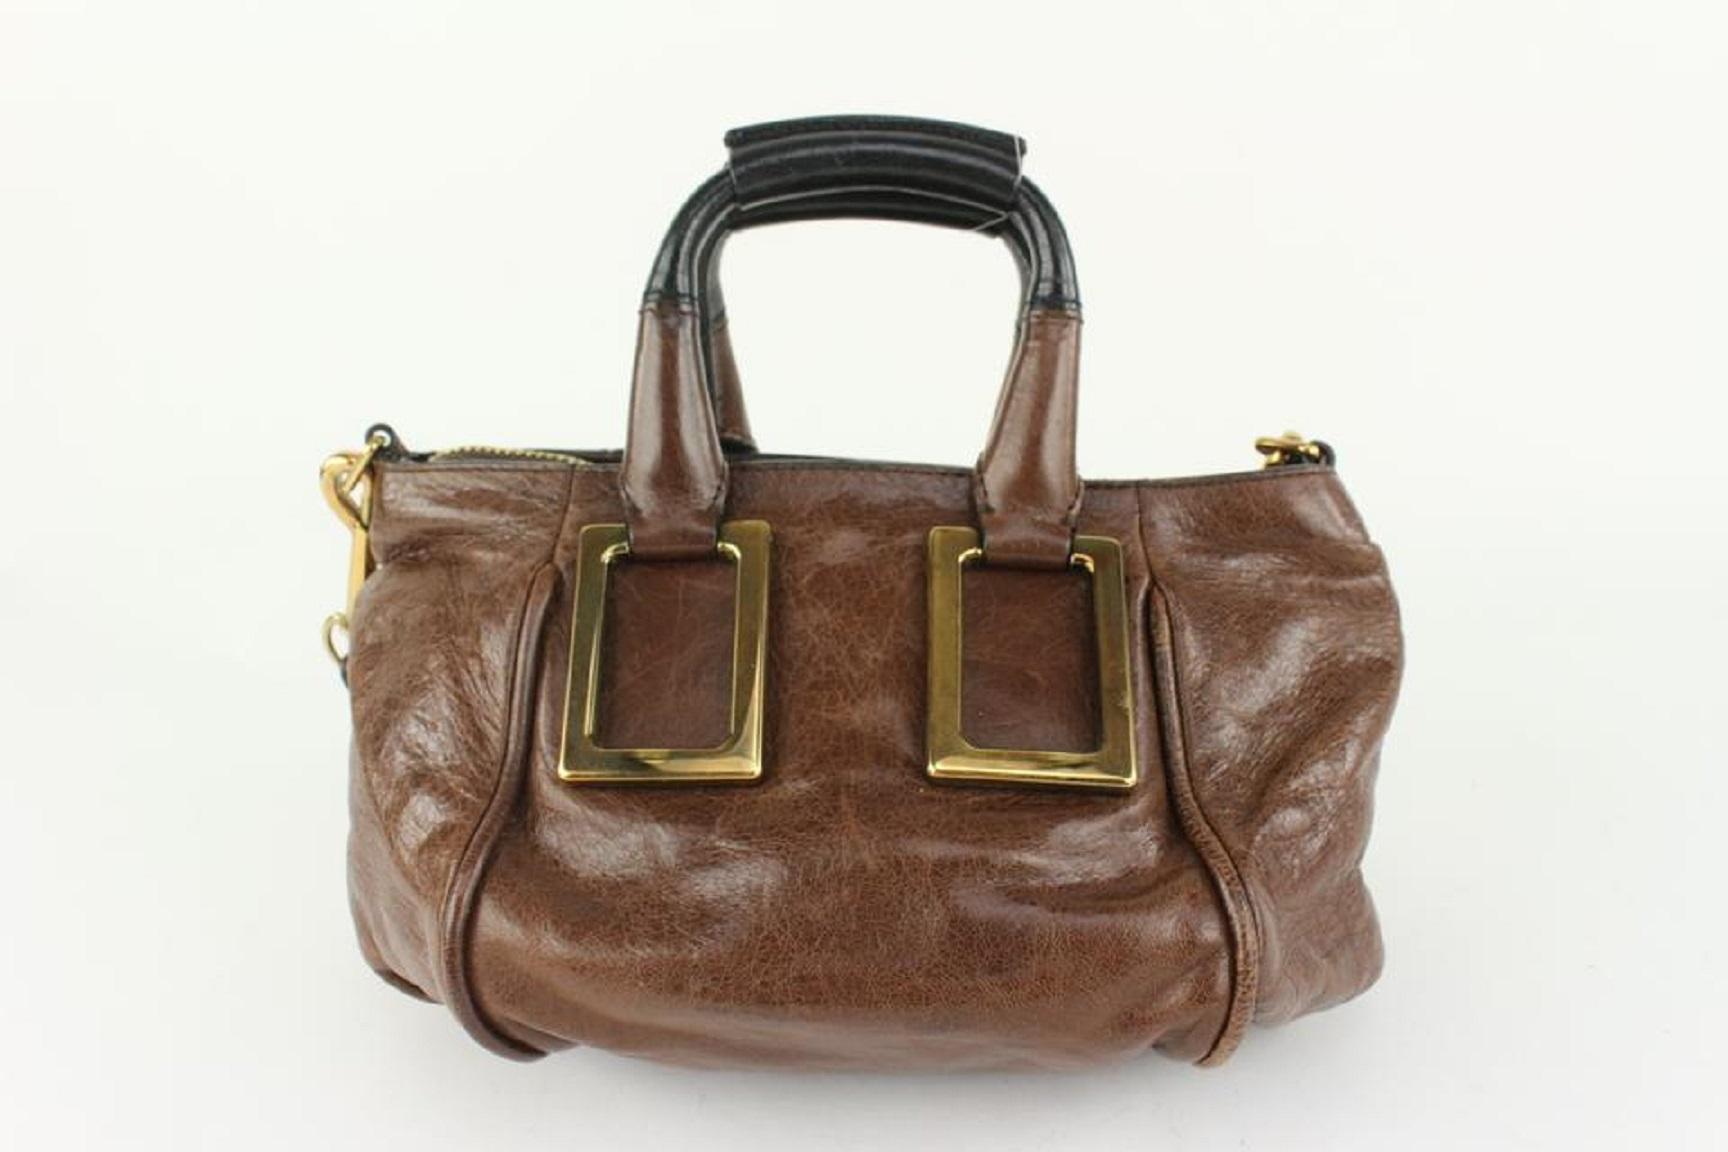 Chloé Brown Leather Ethel 2way Tote Bag 108cl2 In Good Condition For Sale In Dix hills, NY